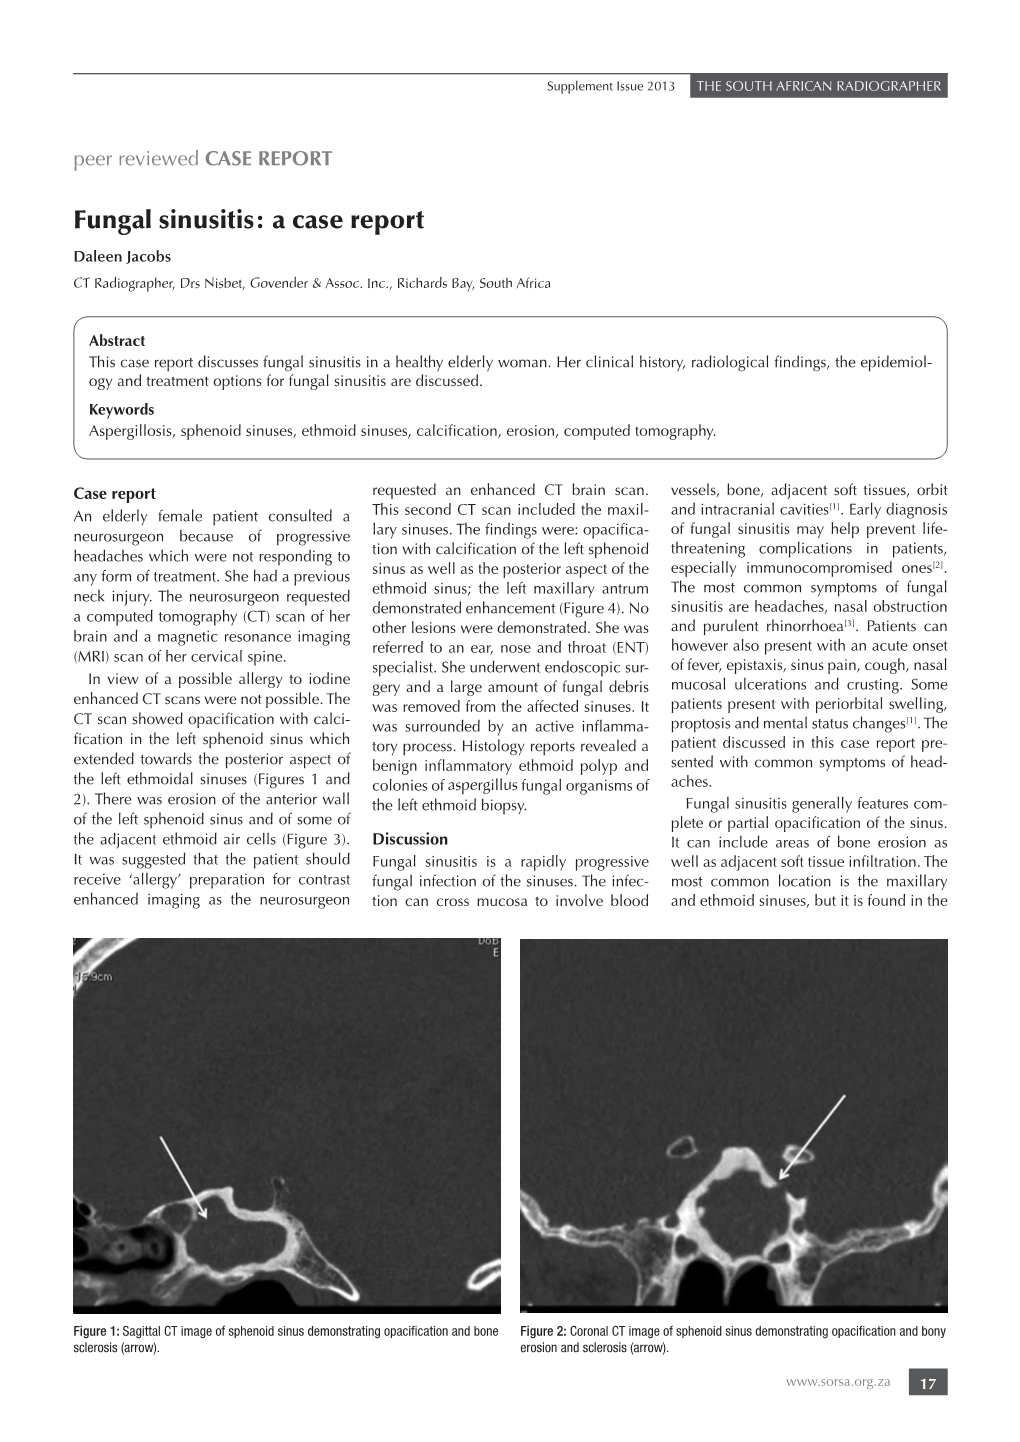 Fungal Sinusitis: a Case Report Daleen Jacobs CT Radiographer, Drs Nisbet, Govender & Assoc